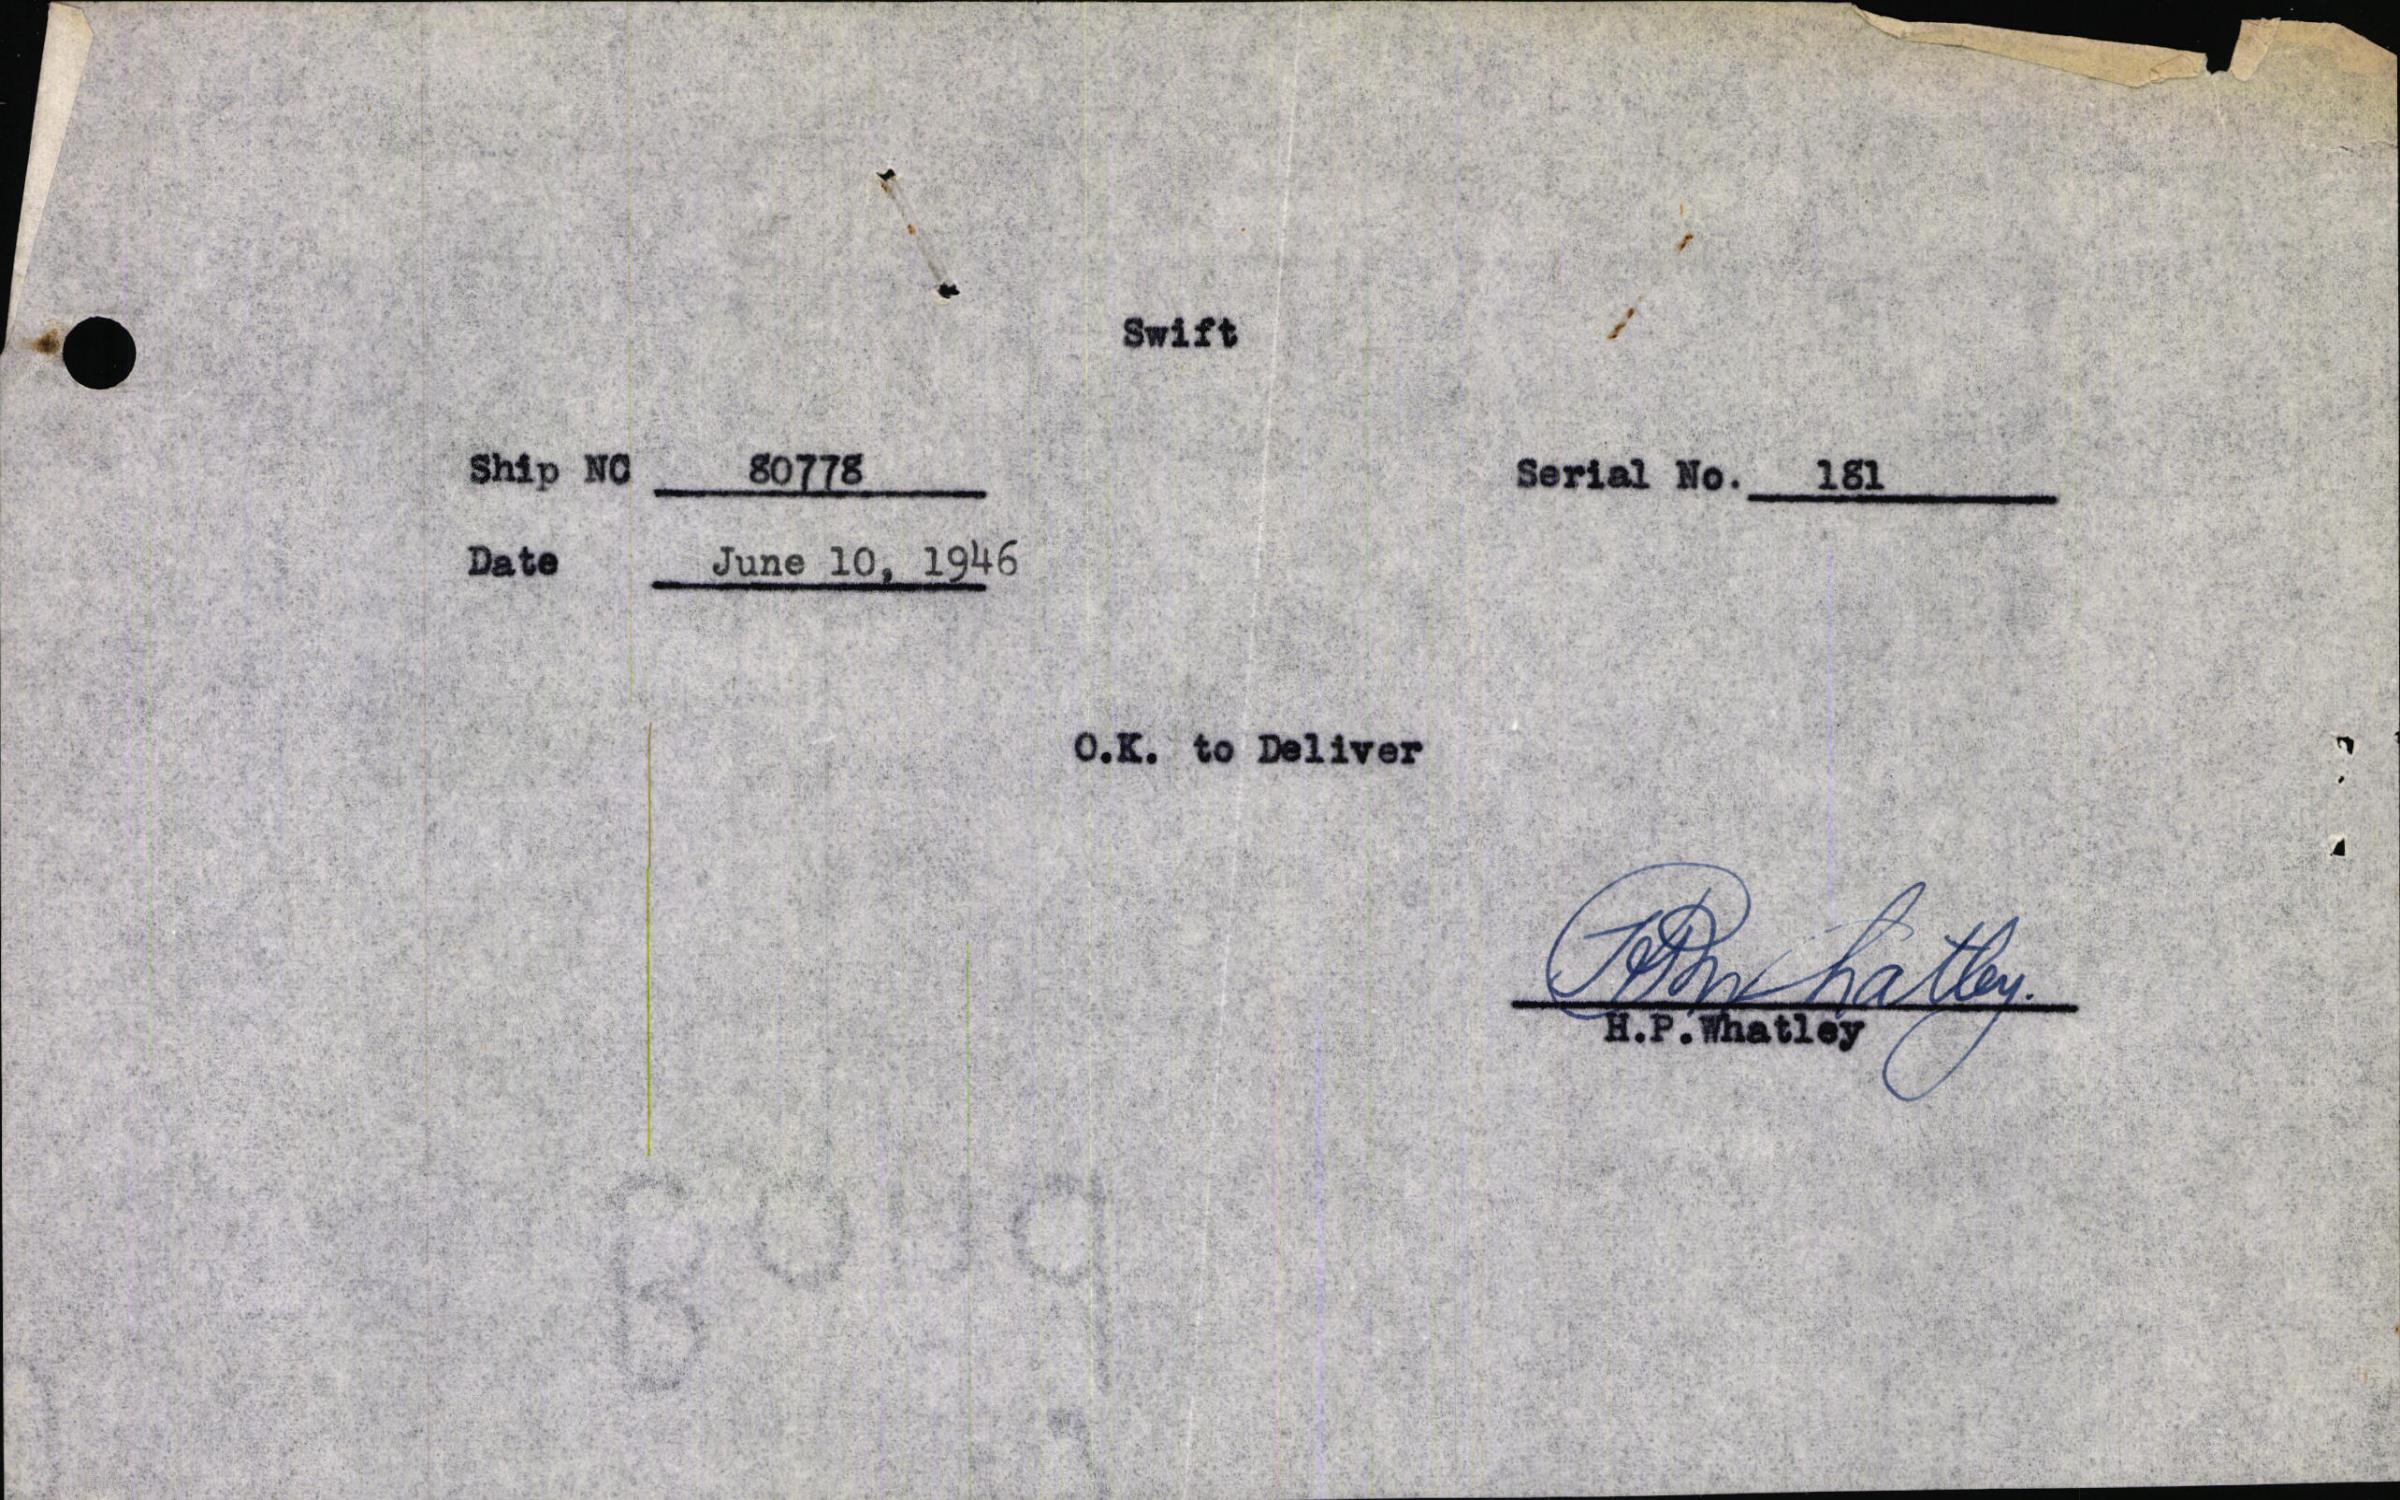 Sample page 3 from AirCorps Library document: Technical Information for Serial Number 181